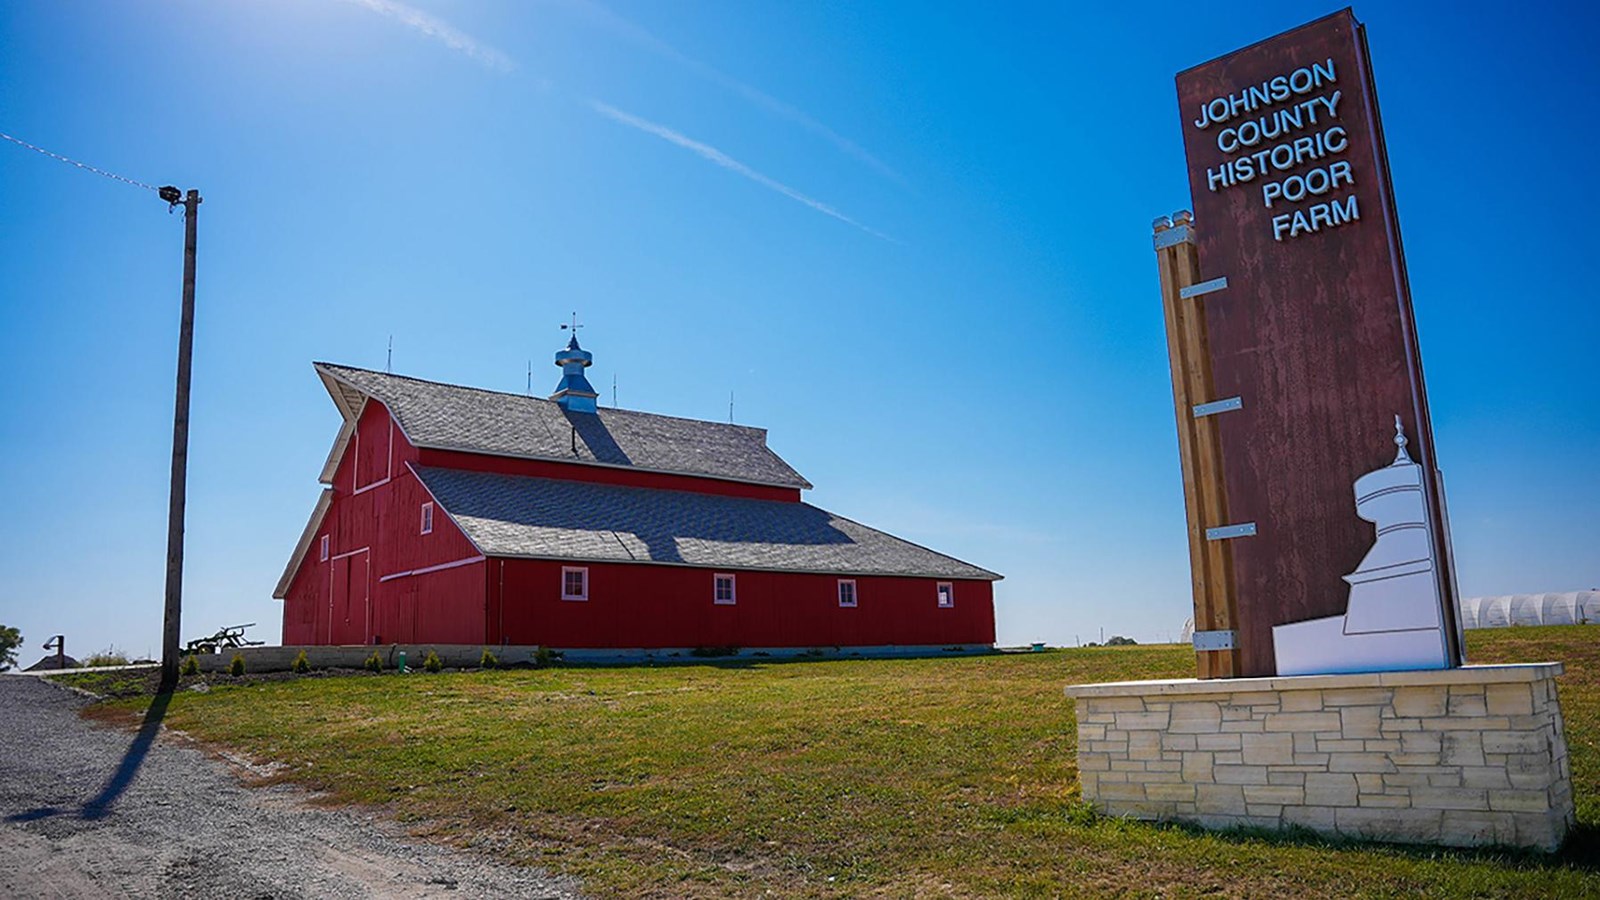 Large red barn with sign in foreground reading 